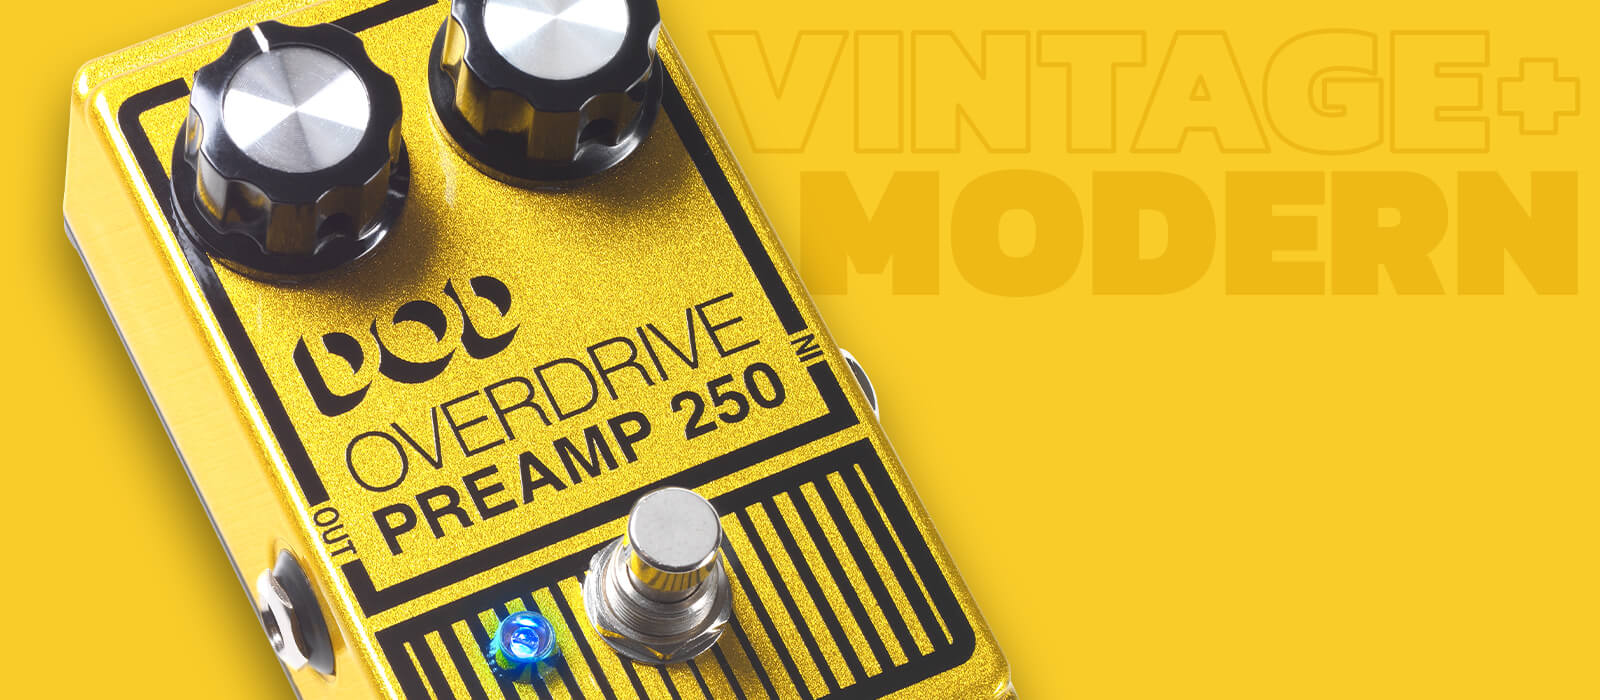 DOD Overdrive Preamp 250 guitar pedal on matching golden yellow background